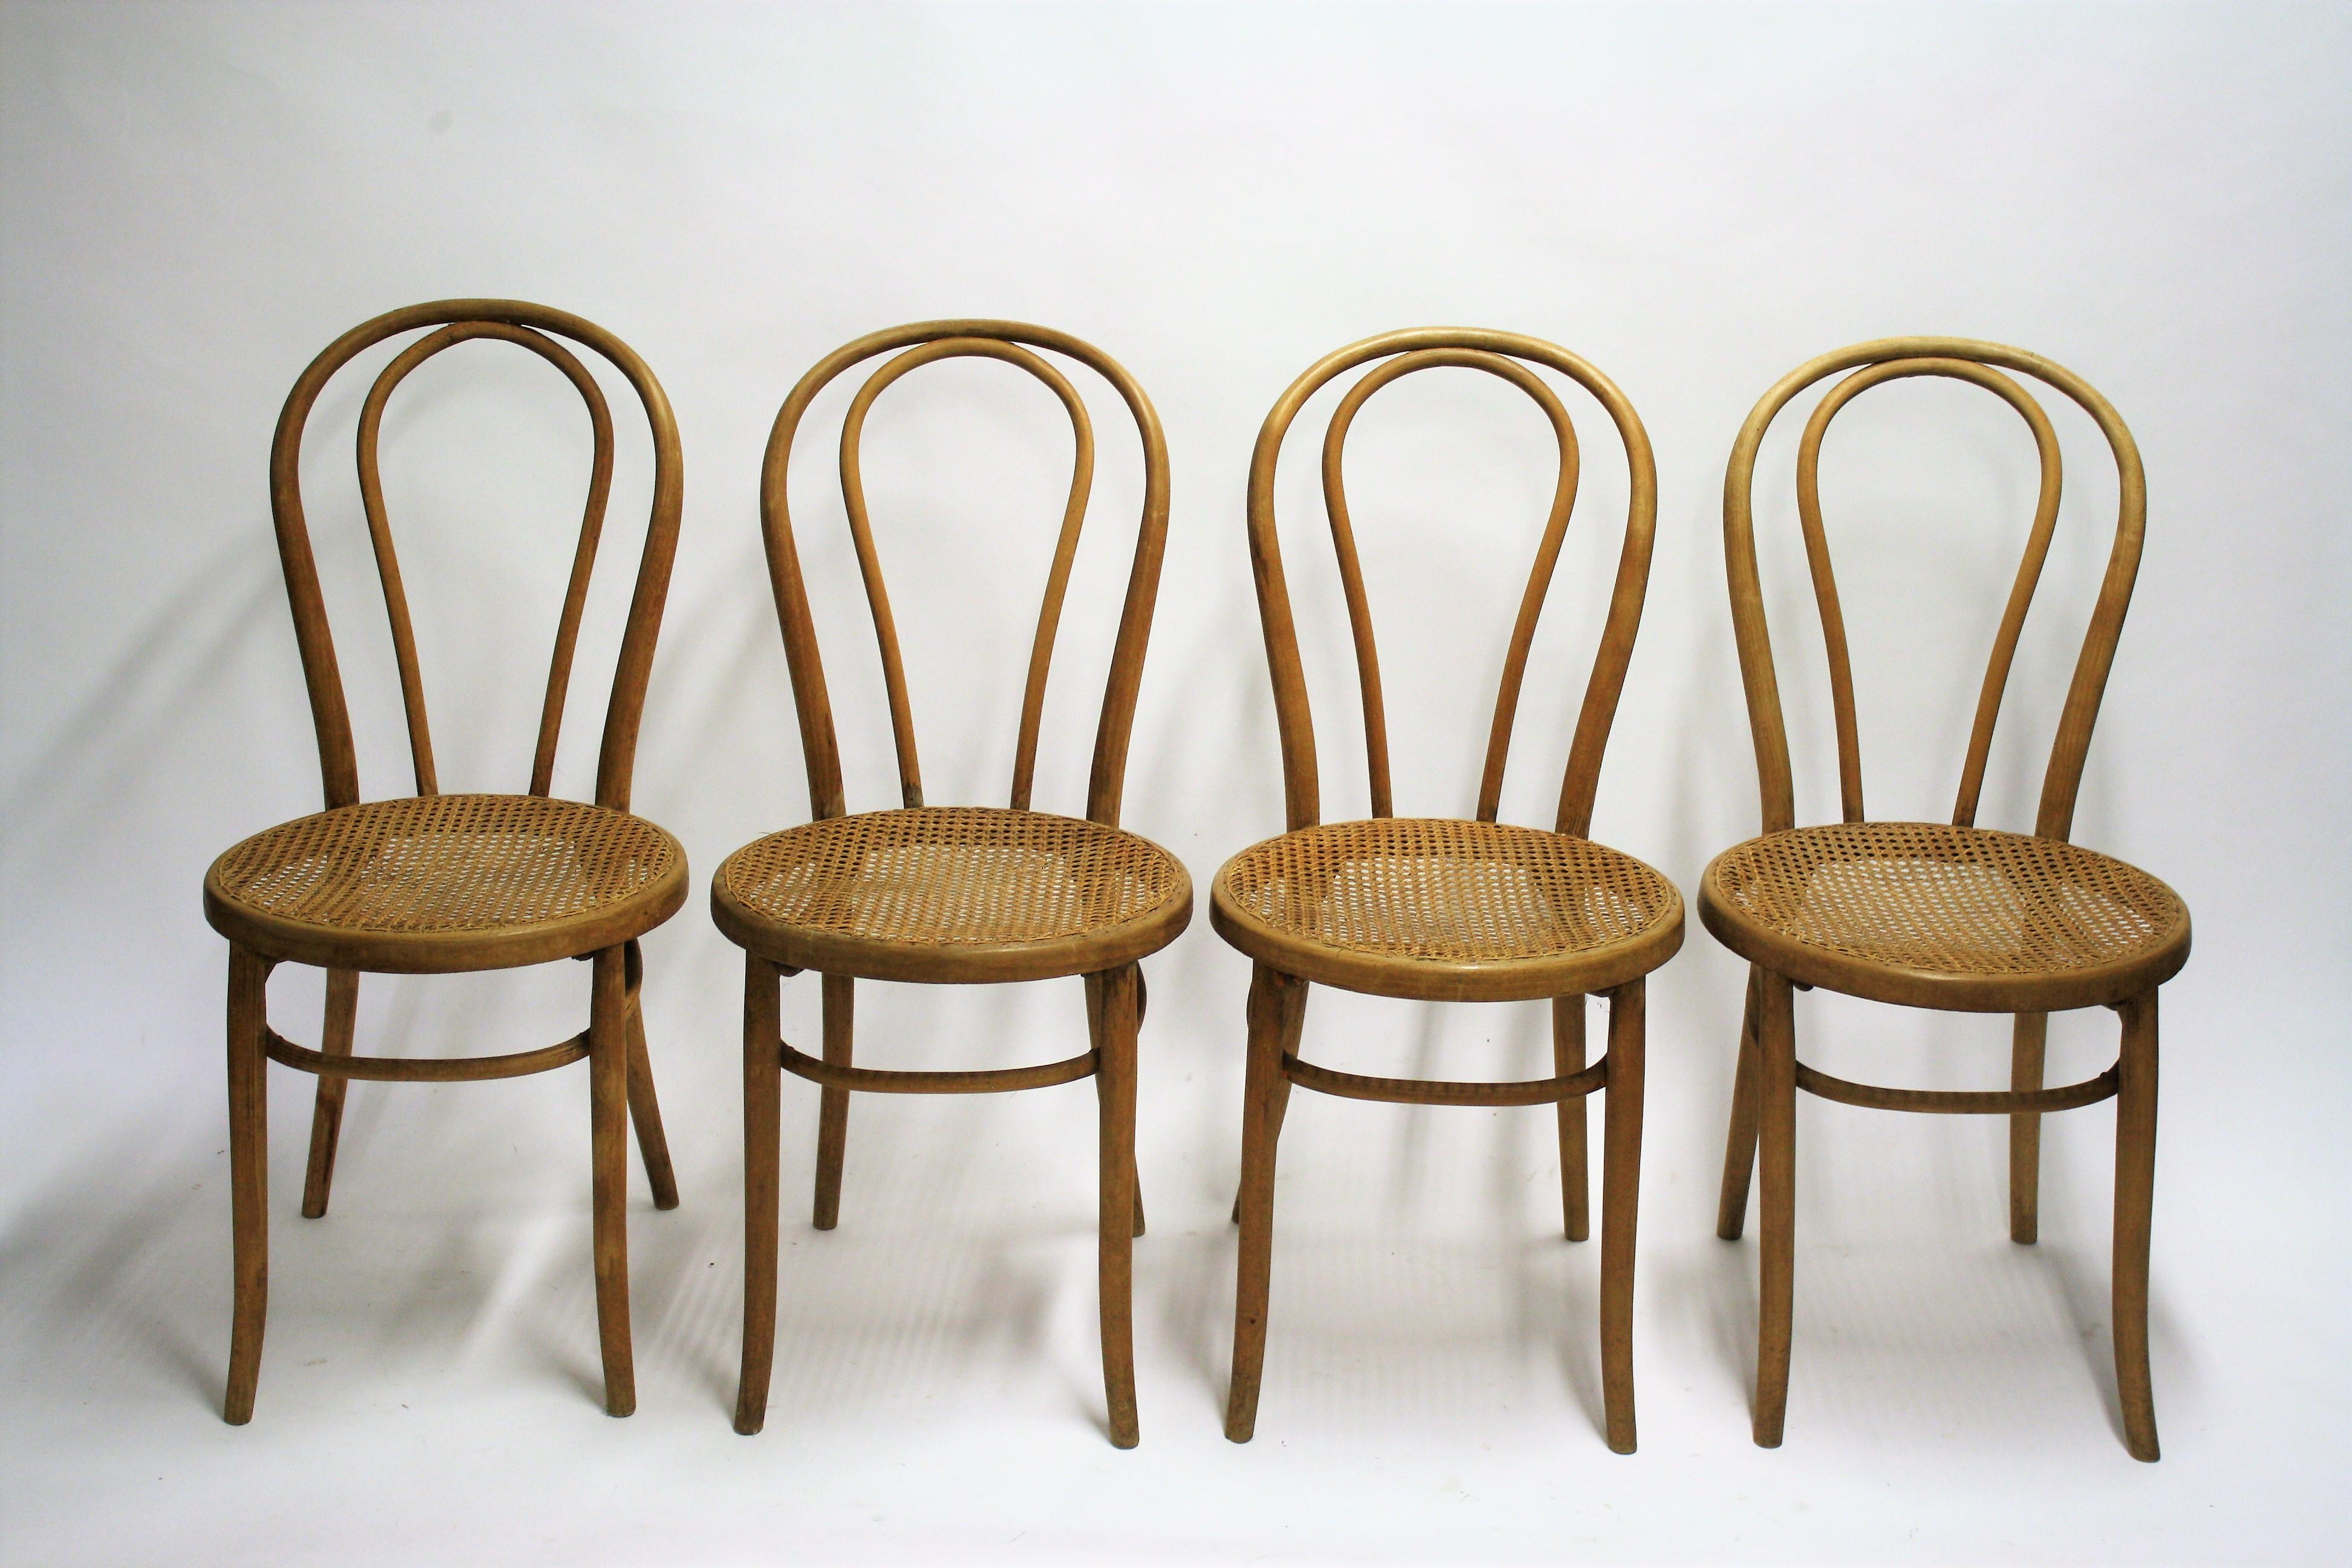 Set of 4 very early Thonet no. 18 dining chairs.

The chairs had some repairs but are still usable.

The use of very old screws shows the age of the chairs.

The cane seats are in good condition.

1920s - Romania

Dimensions:
Height